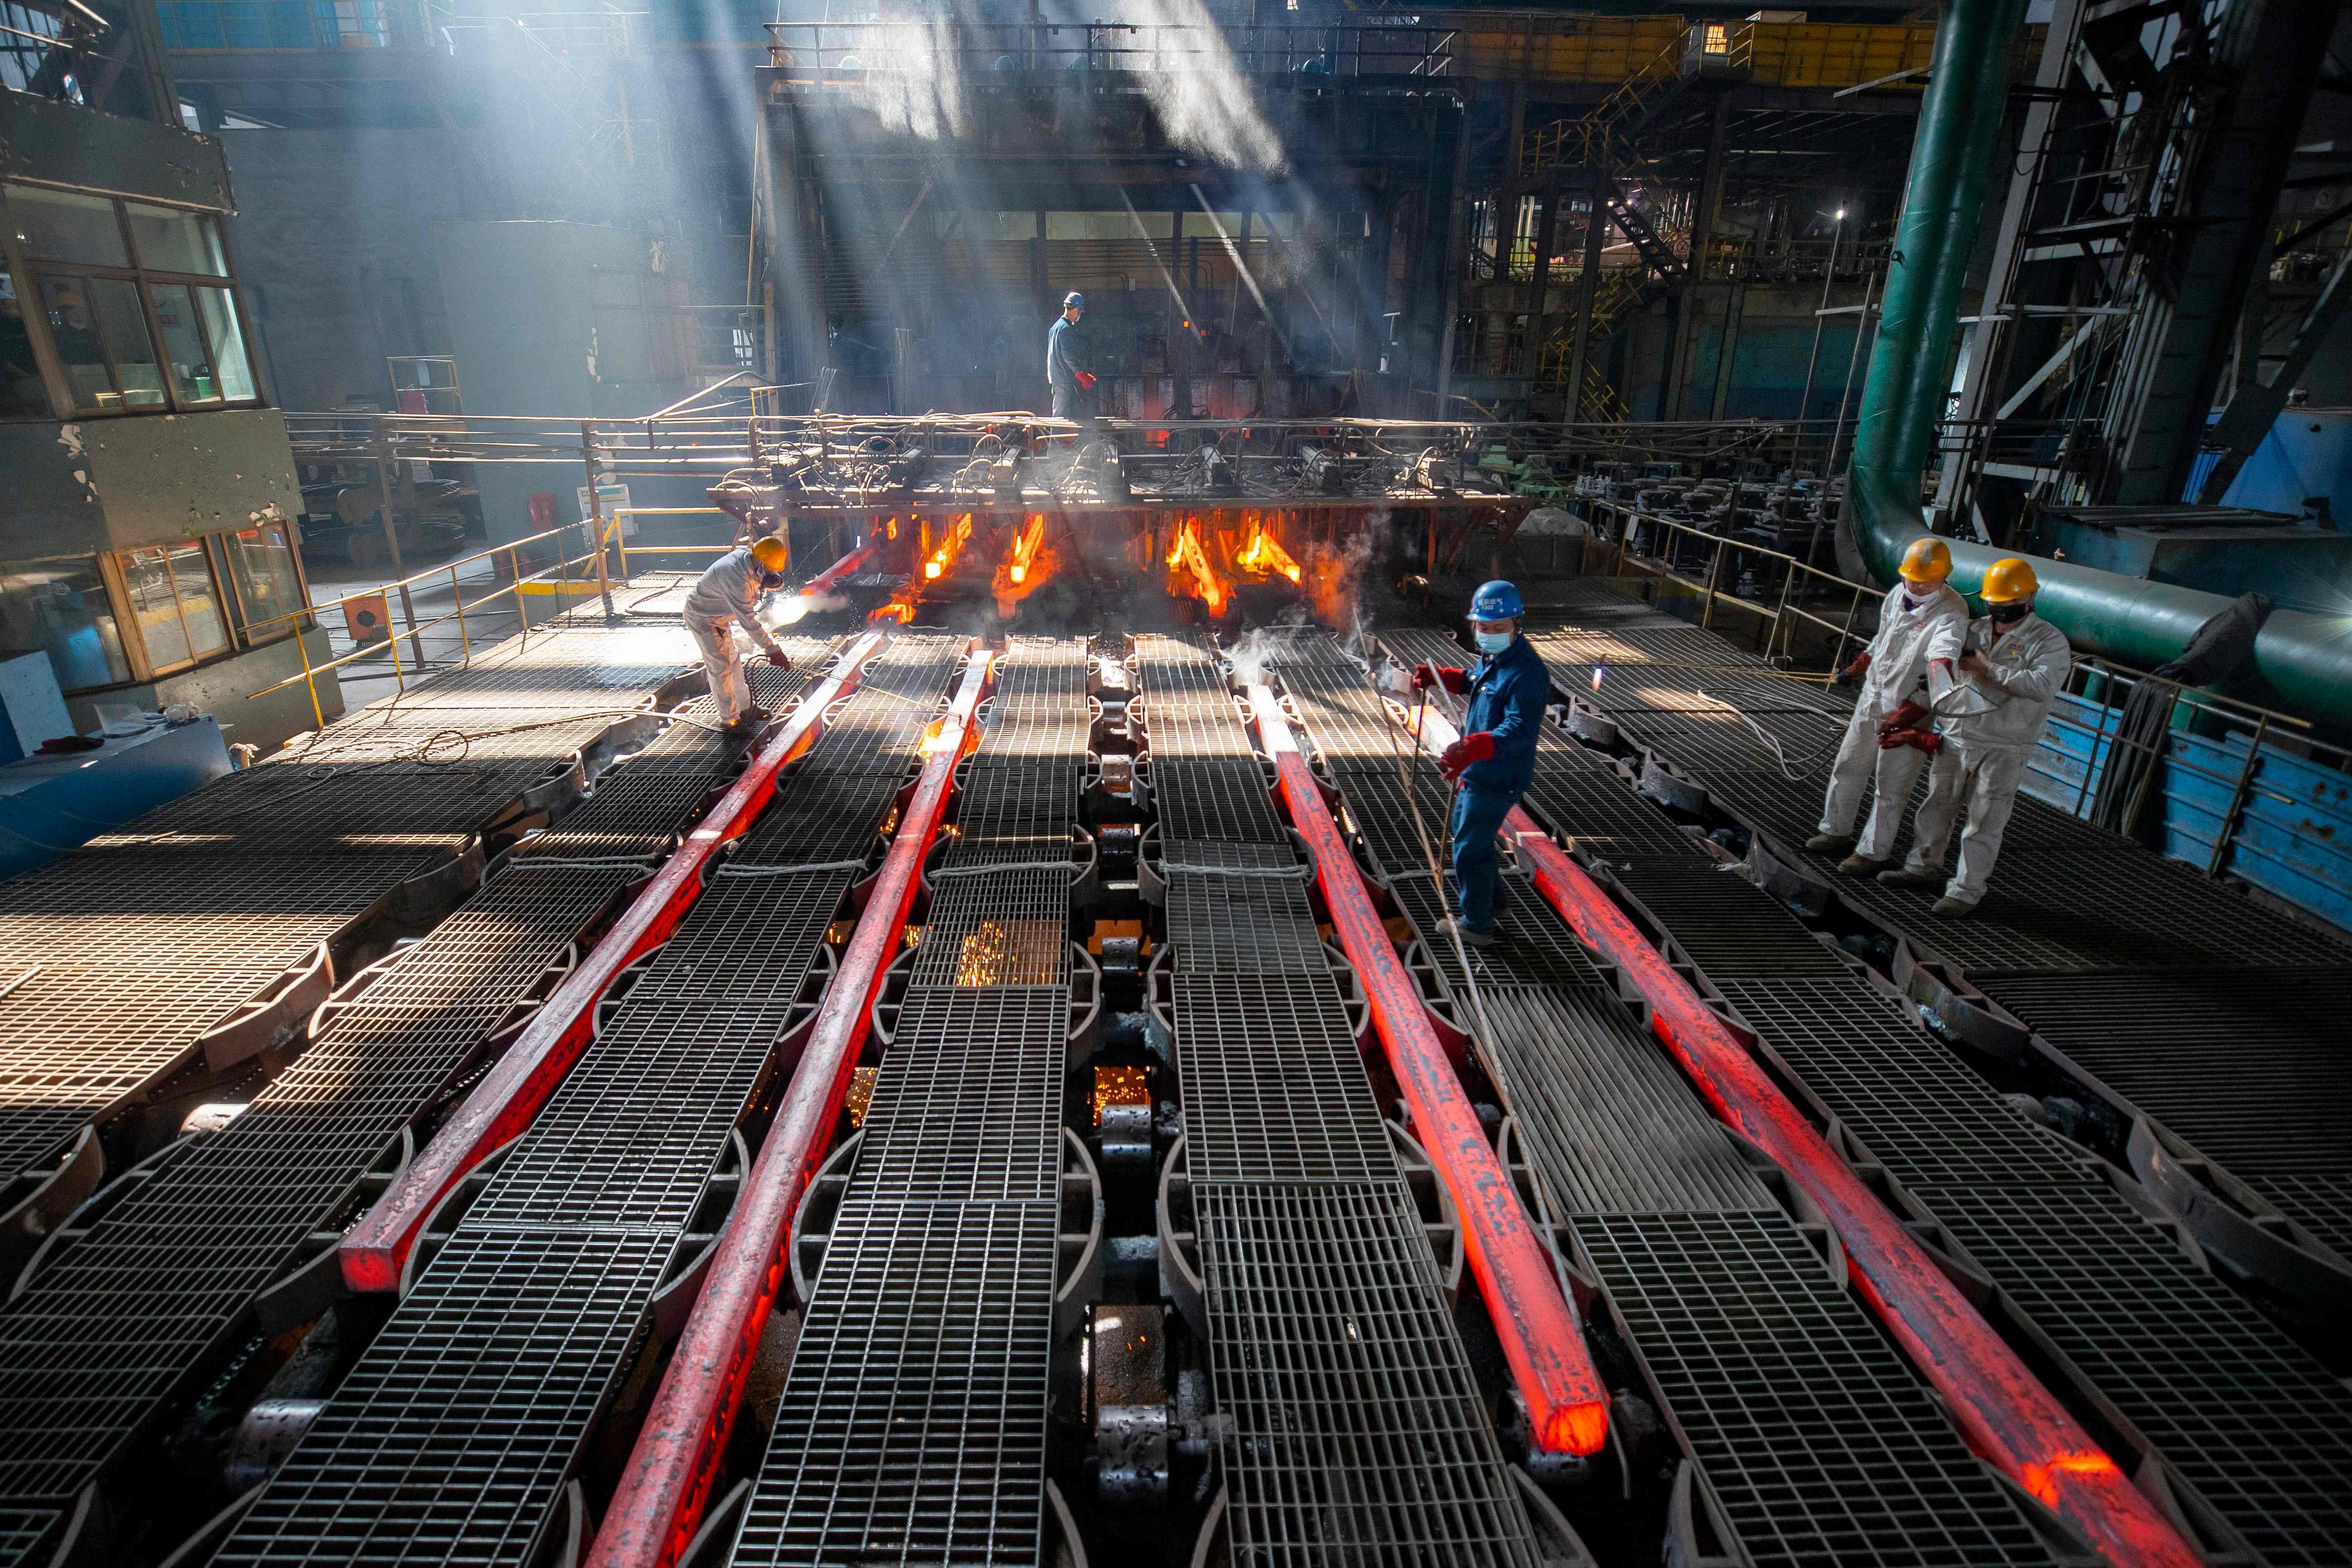 Workers make iron bars at a steel factory in Lianyungang, in eastern Jiangsu province, on February 12. Photo: AFP